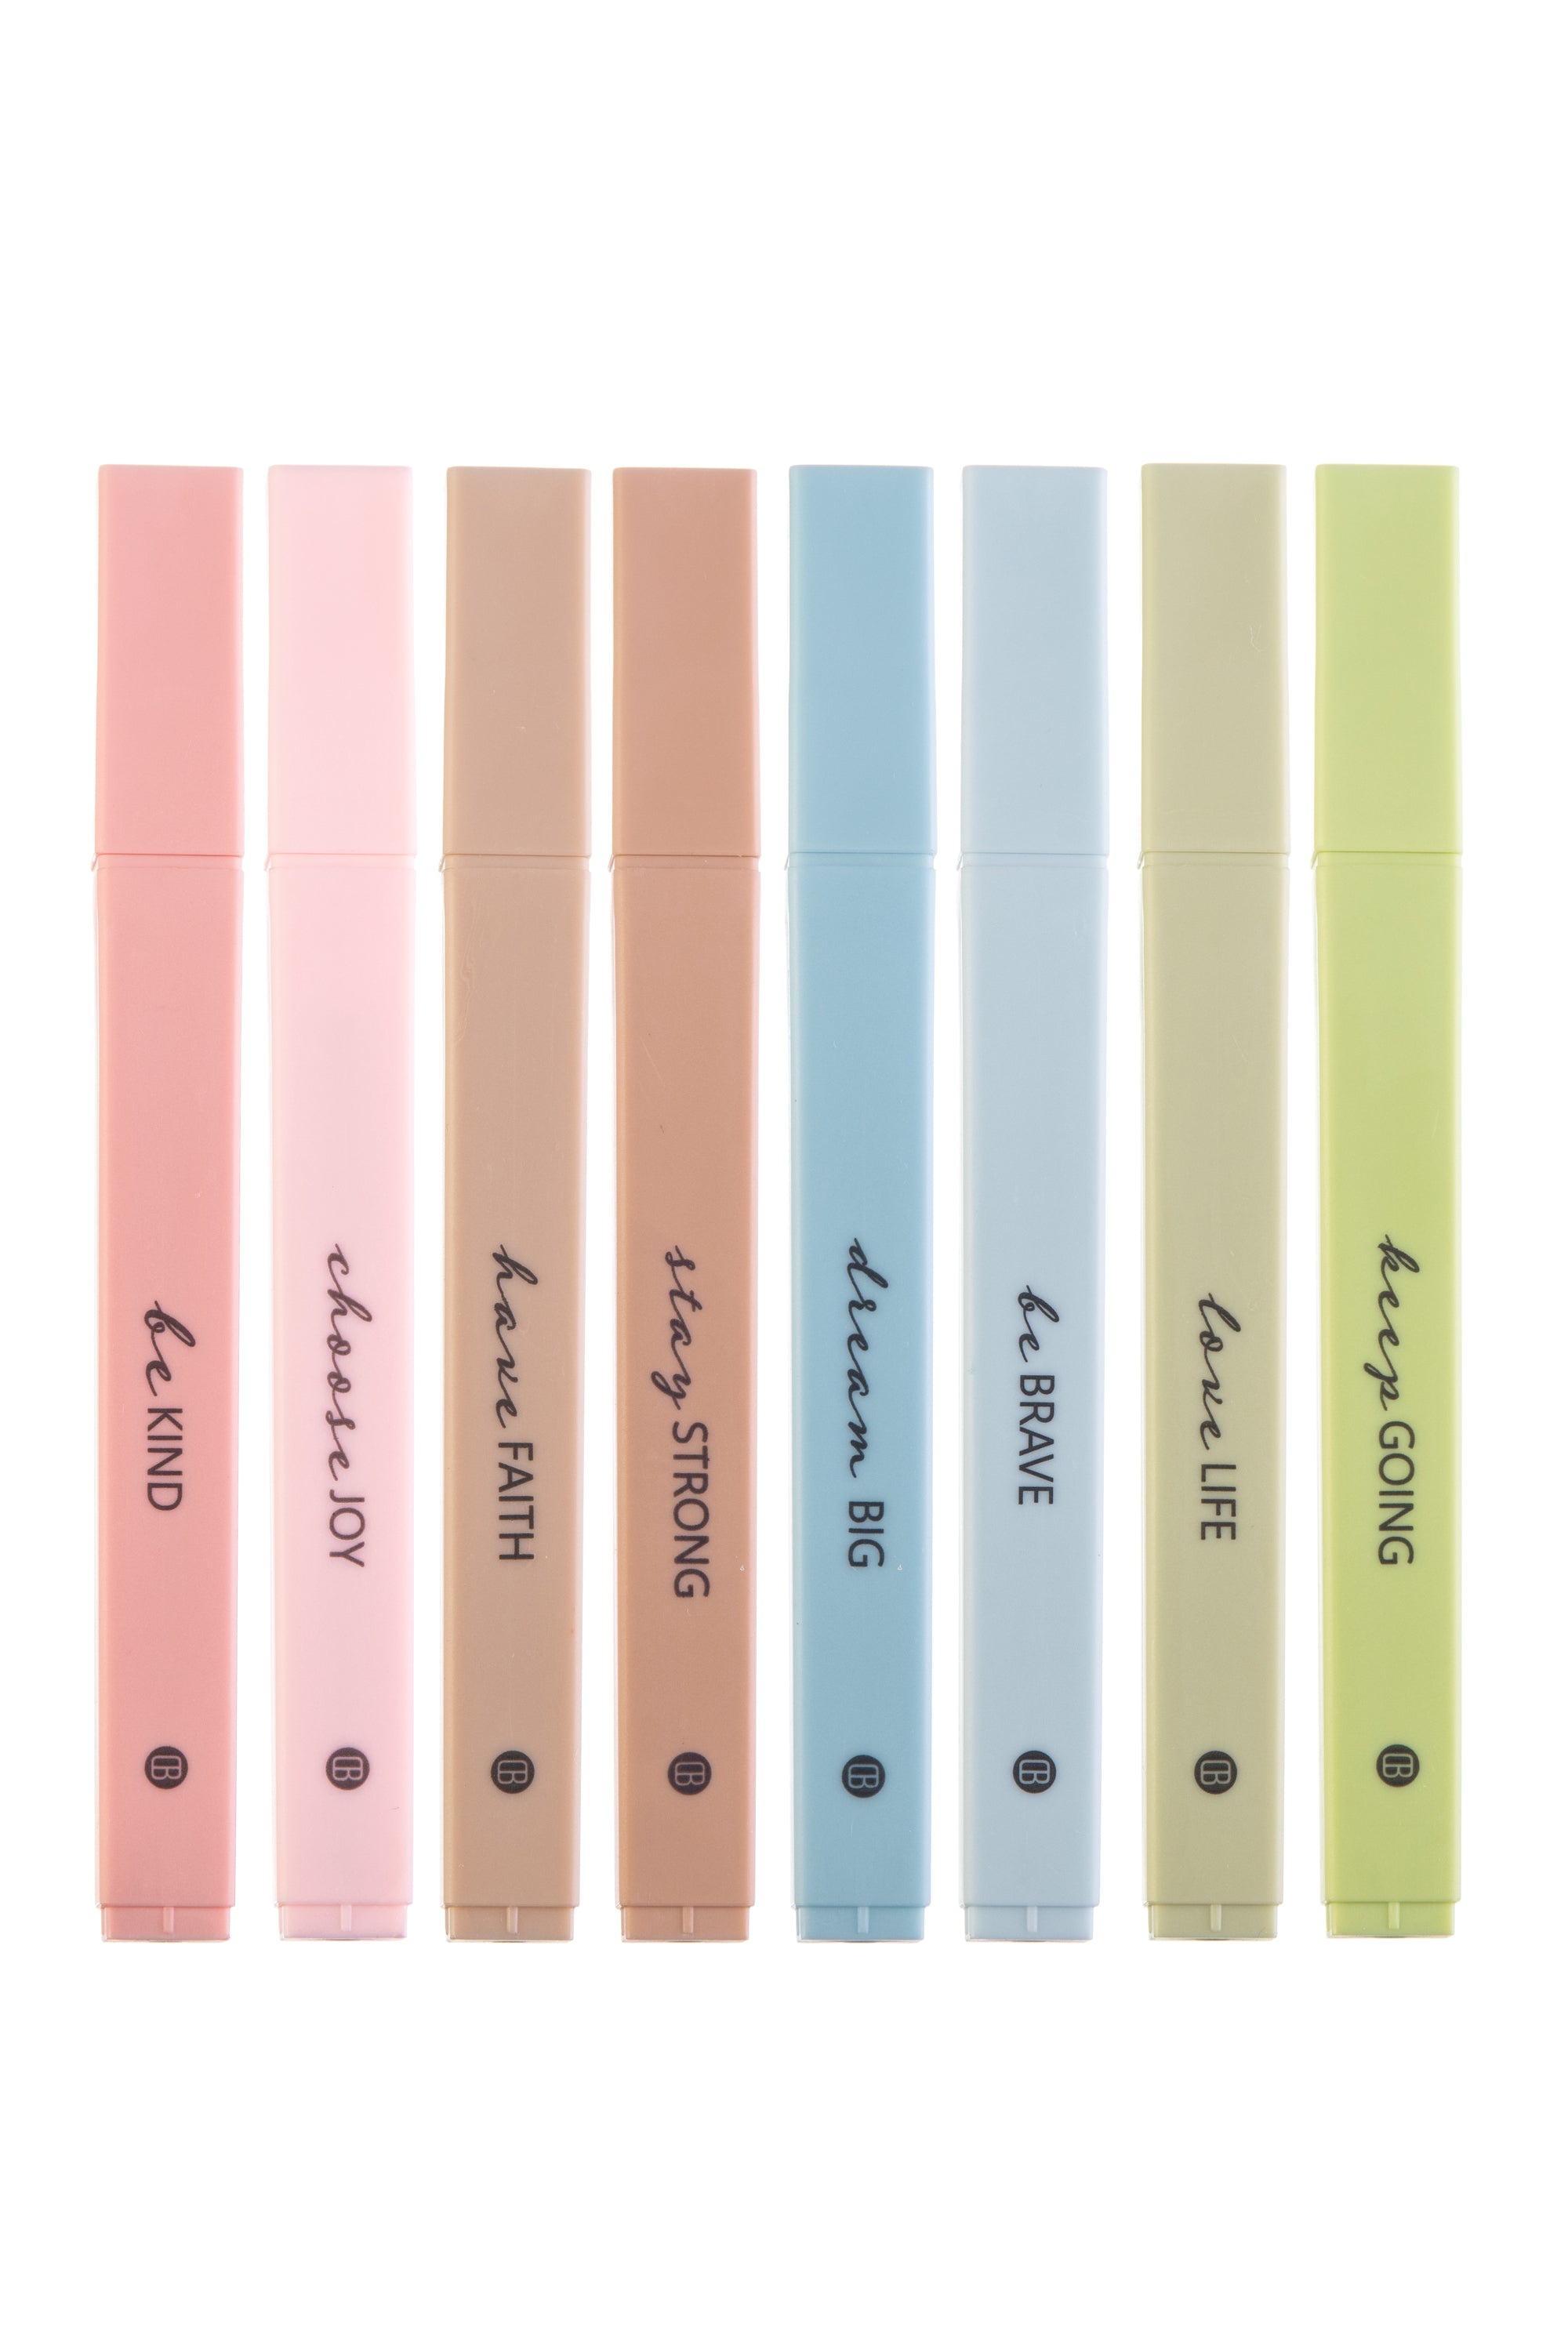 Blieve - Aesthetic Highlighters and Gel Pens with Soft Ink and Tip, No Bleed Dry Fast Easy to Hold, for Bible Journaling Planner Notes School Office